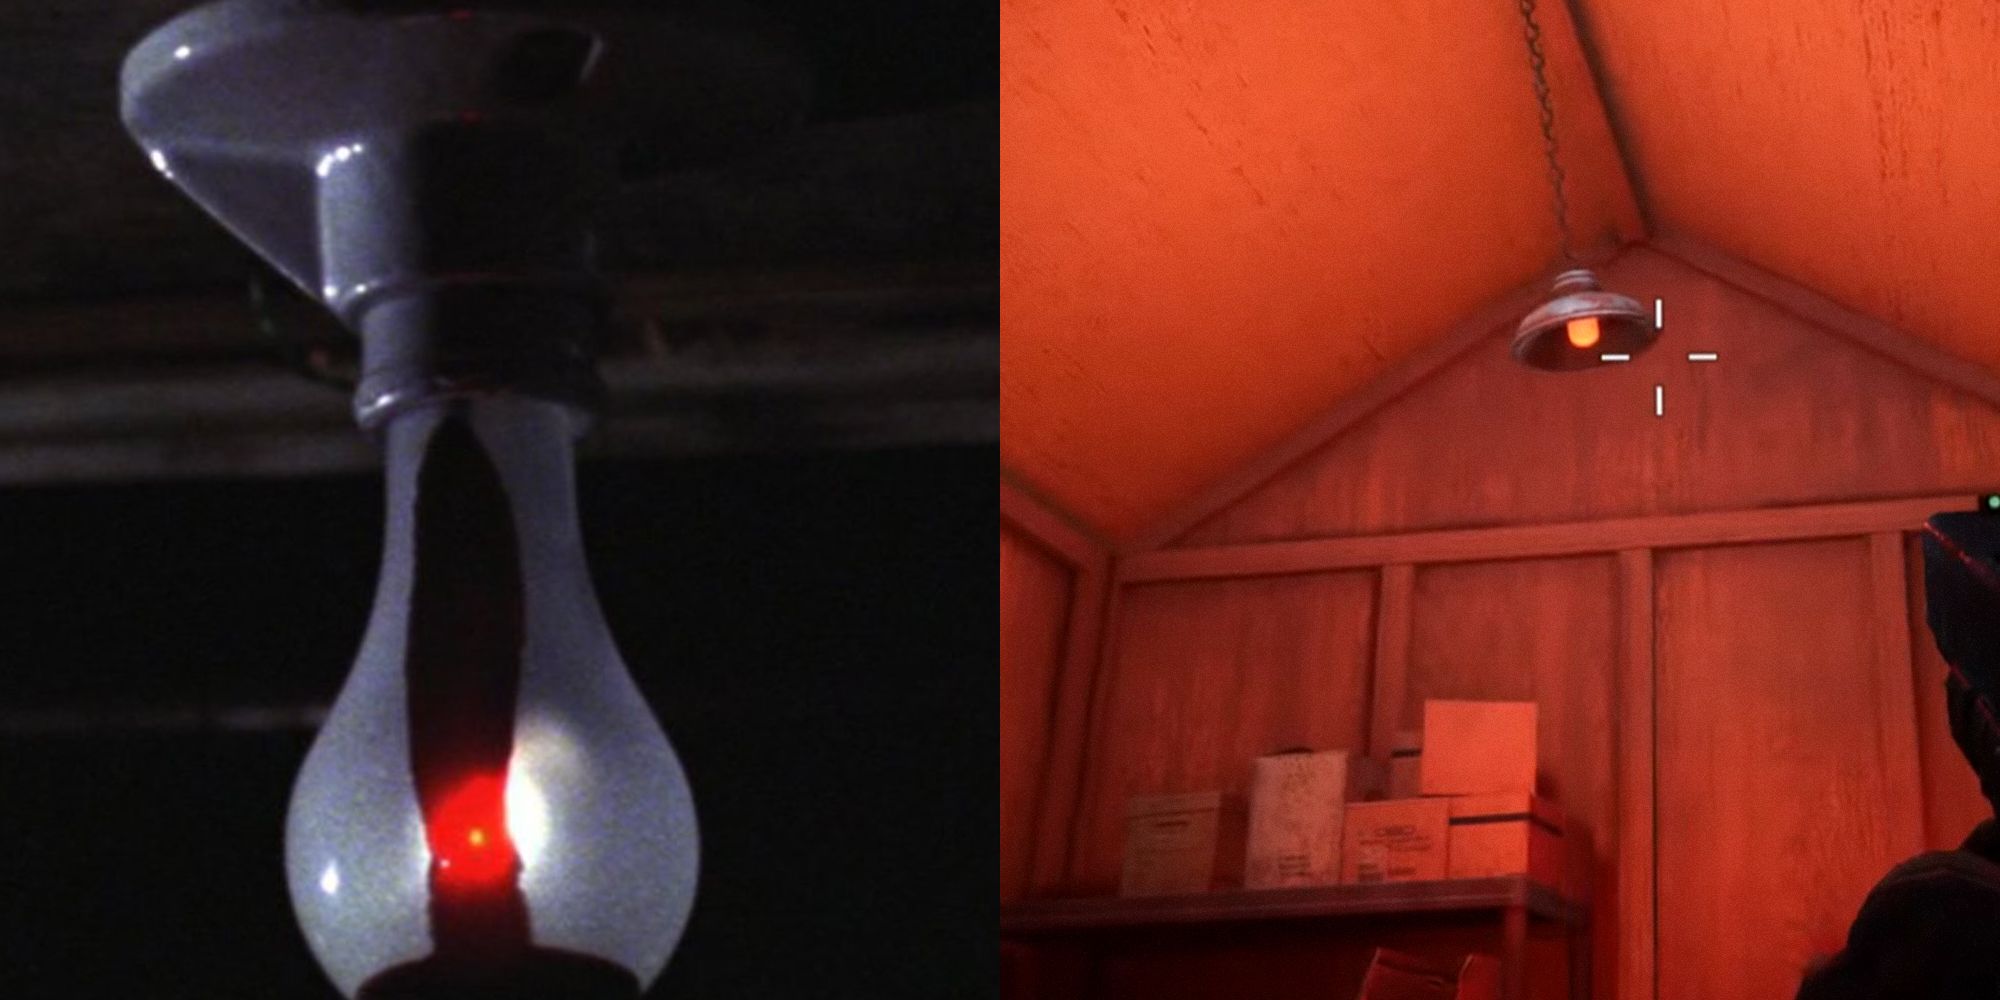 The Evil Dead, Back 4 Blood. Split image of two photos of lamps. Left lamp has blood on it, right lamp is a red hue.